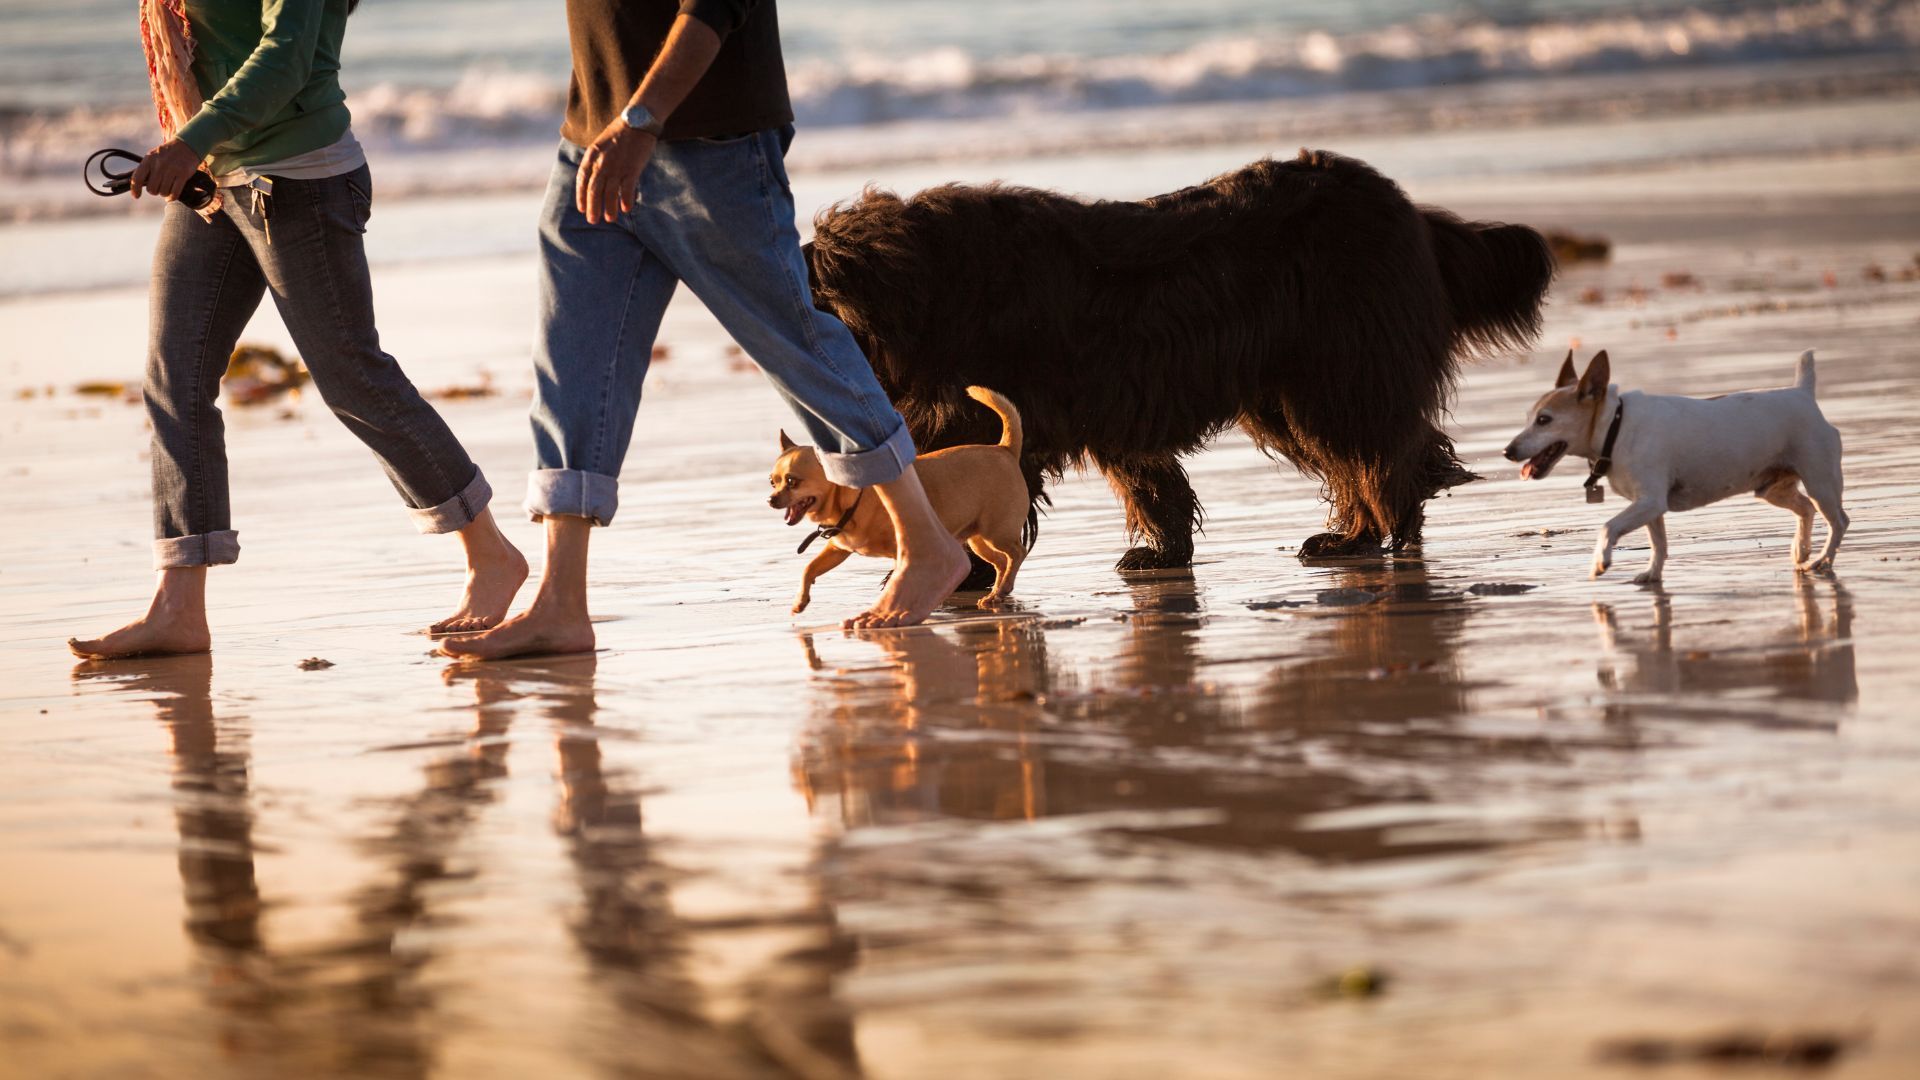 <p>                     Carmel-by-the-sea is known for being one of the best dog-friendly towns in America and it’s for good reason. You’ll find water bowls, dog treats and biodegradable bags all available. So take a trip with your four legged friend to Carmel Beach to make memories under the sun.                   </p>